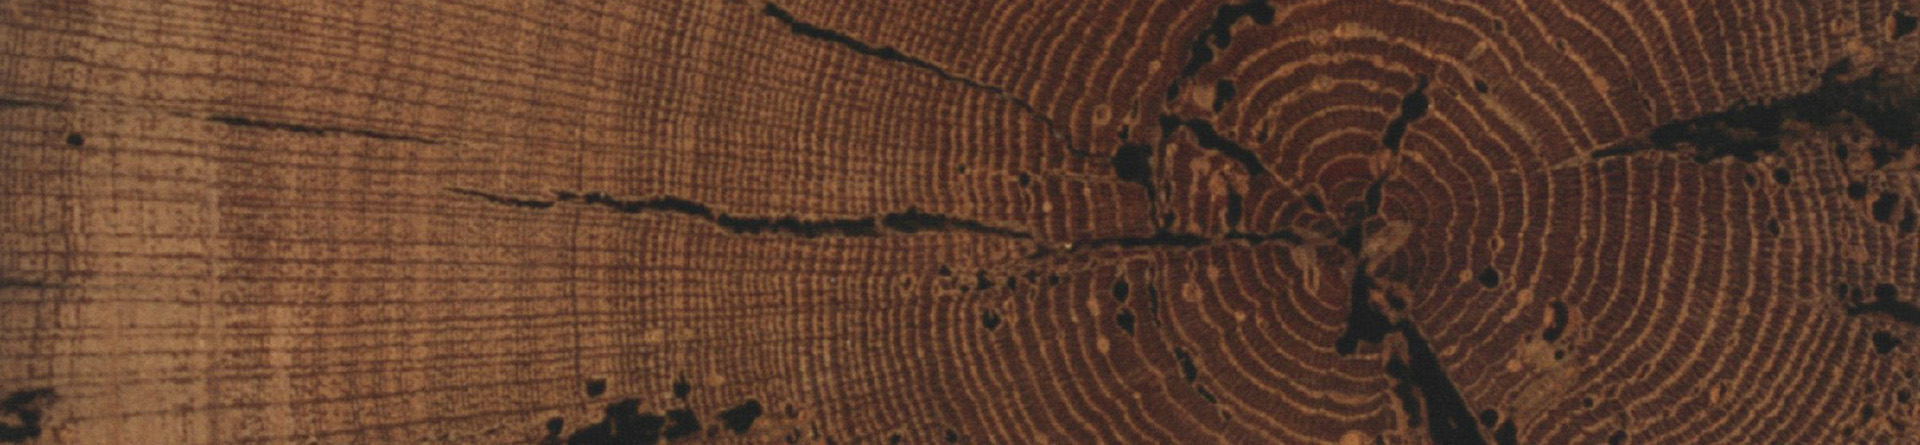 Photograph of tree trunk cross-section